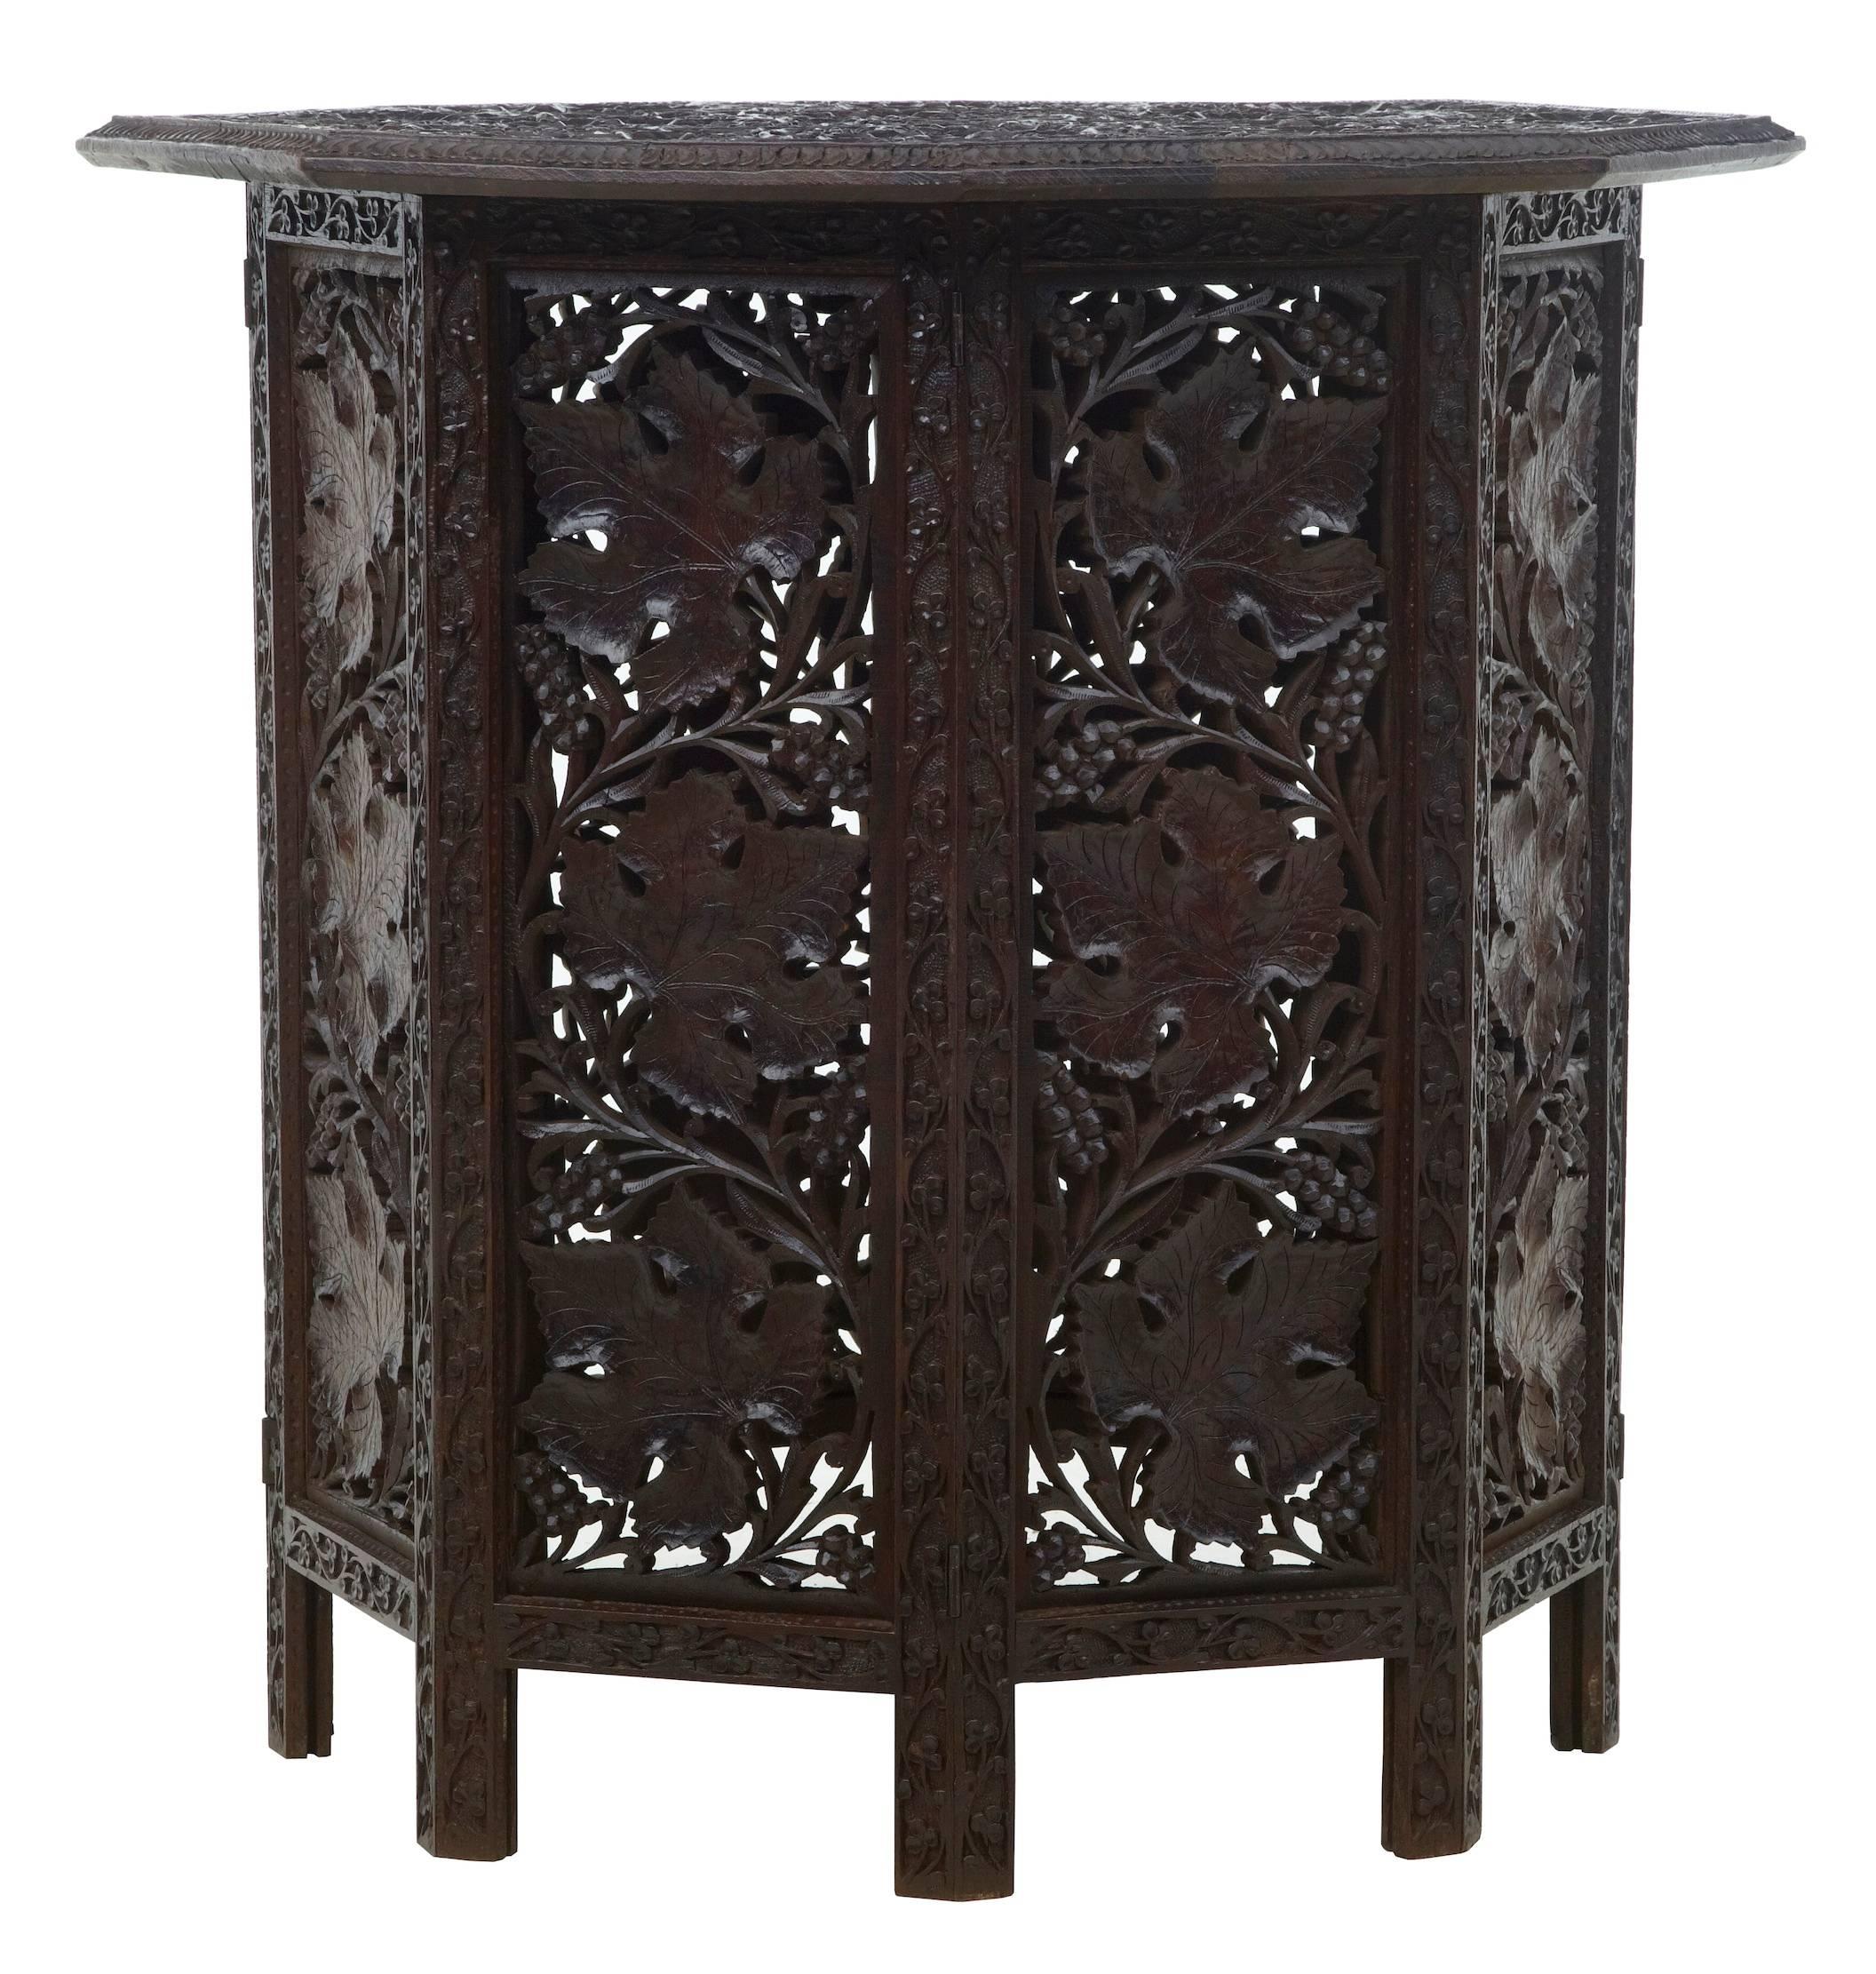 Fine quality pierced carved octagonal table, circa 1880.
Beautifully carved with leaves and vines.
Top is removable and sits on the base which is collapsible.
Measures:
Height: 25